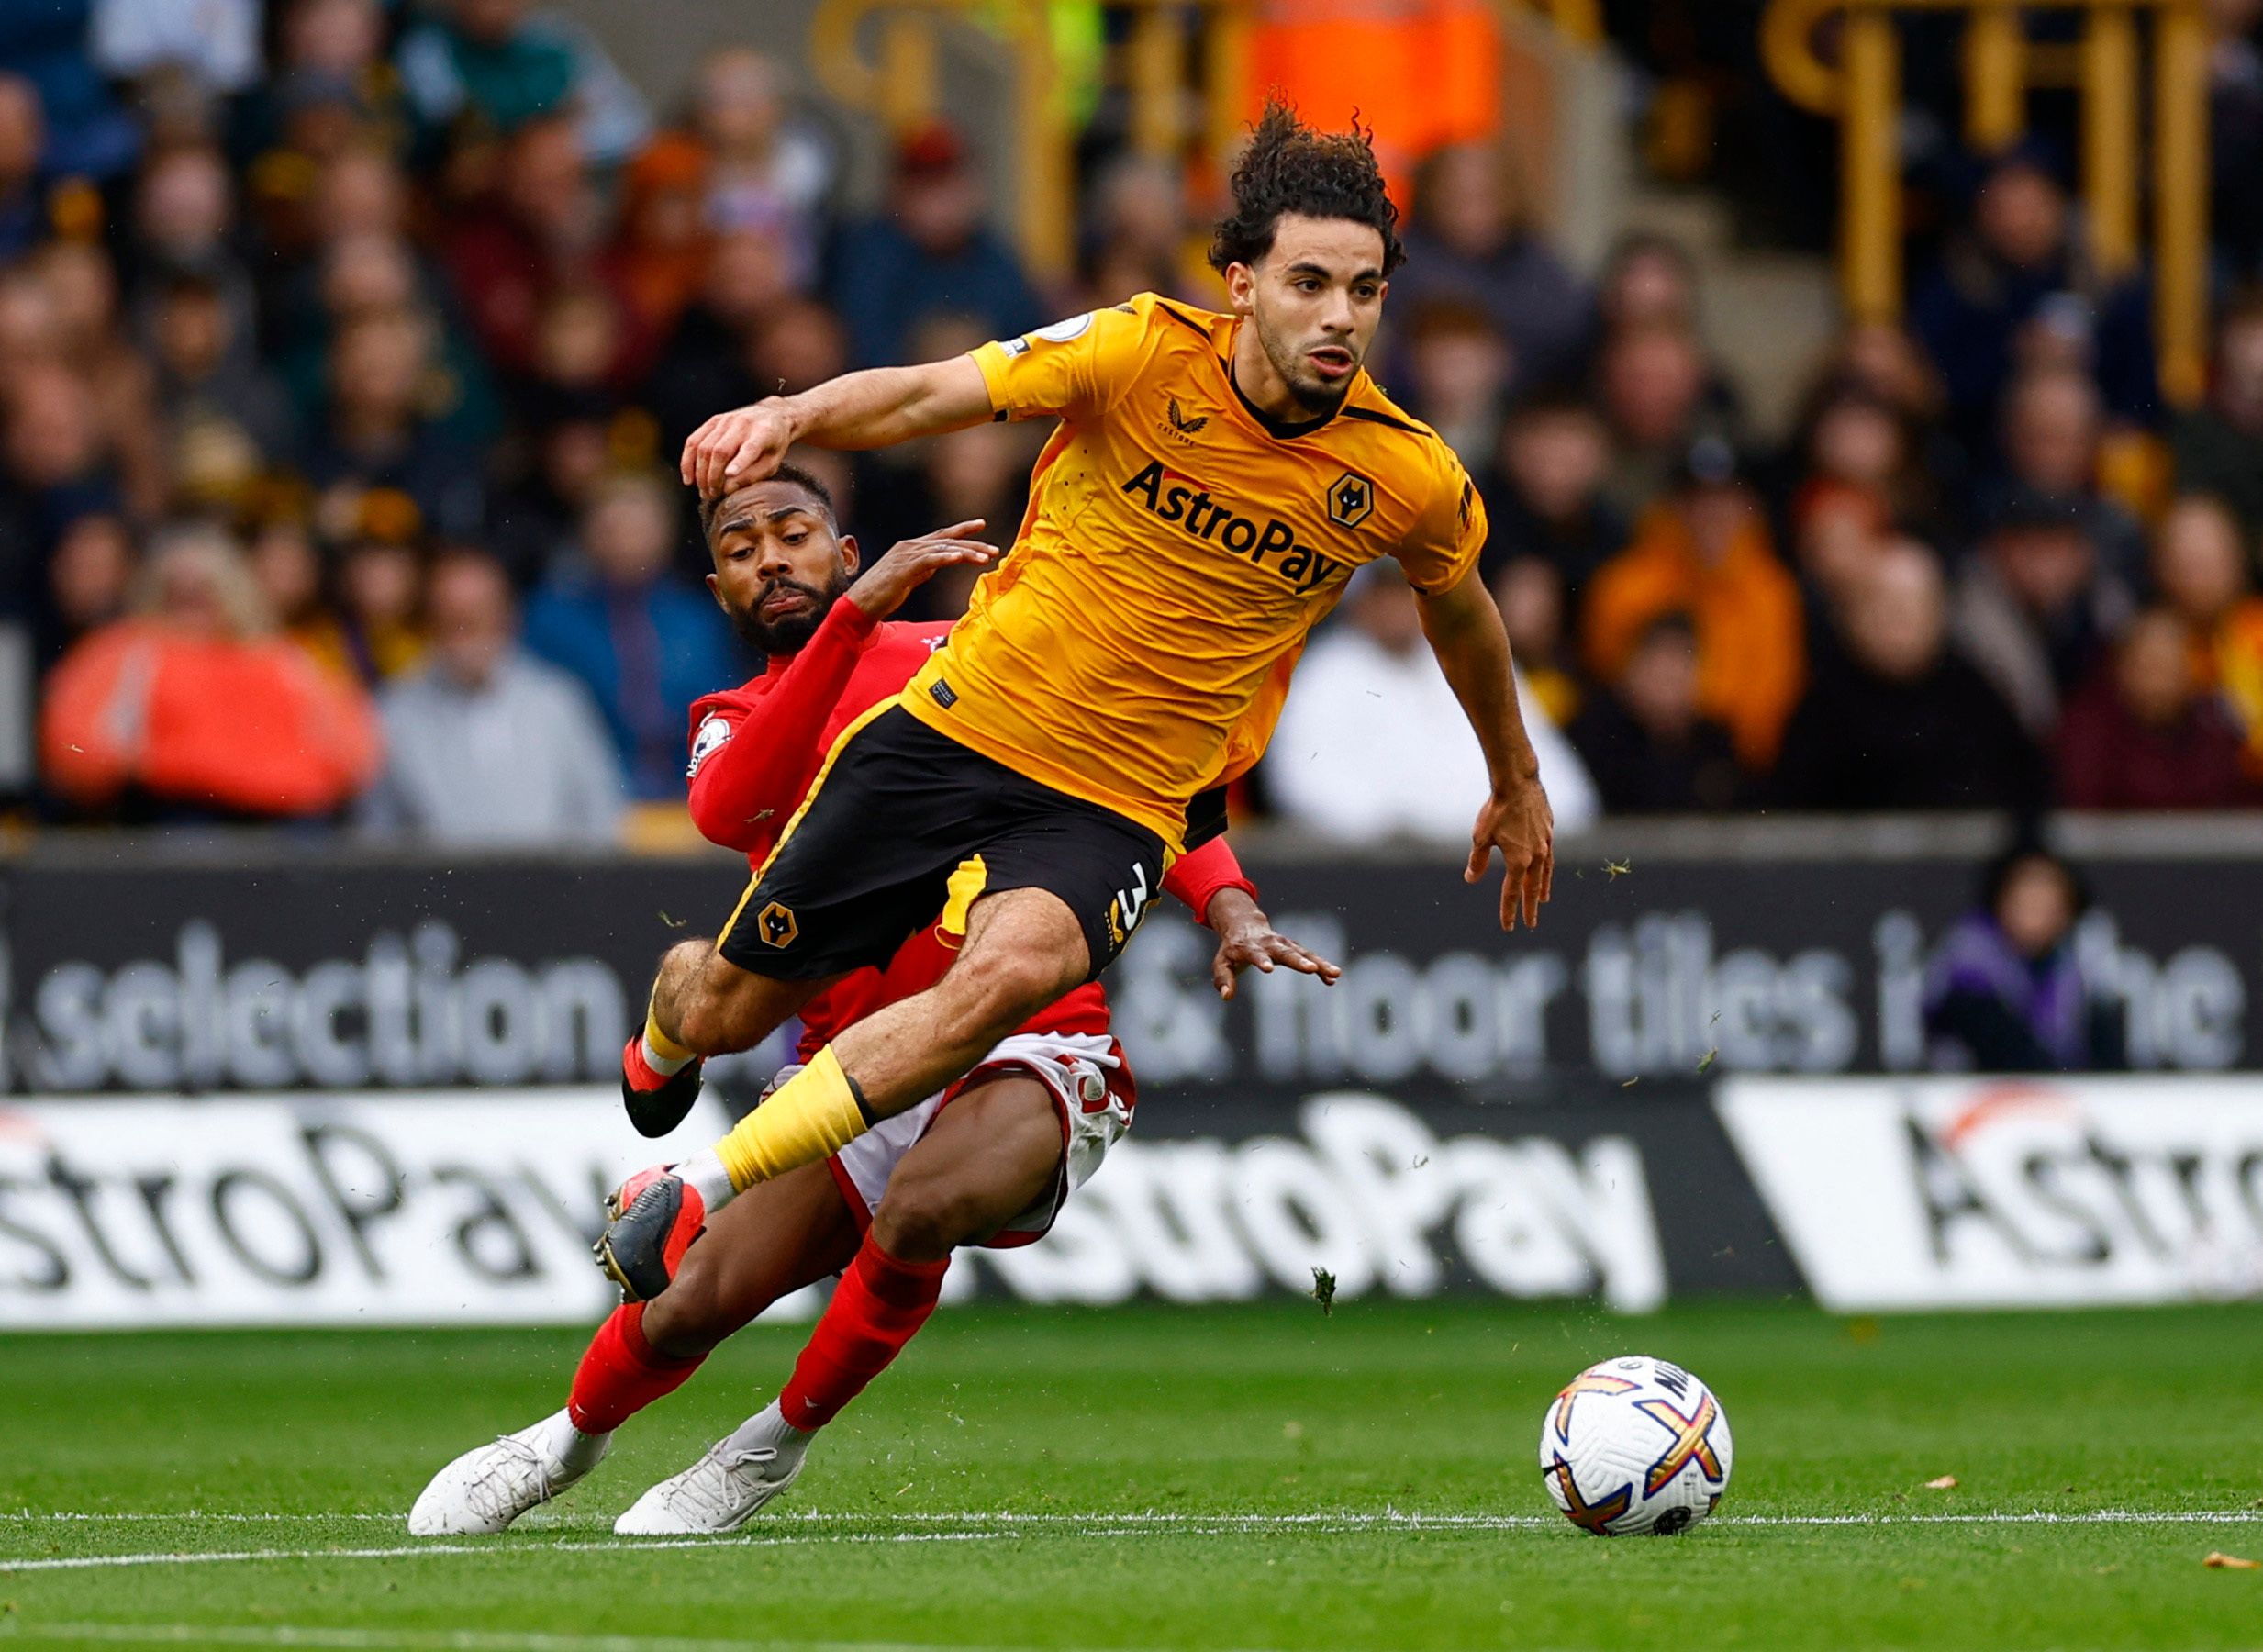 Soccer Football - Premier League - Wolverhampton Wanderers v Nottingham Forest - Molineux Stadium, Wolverhampton, Britain - October 15, 2022  Nottingham Forest's Emmanuel Dennis fouls Wolverhampton Wanderers' Rayan Ait-Nouri before receiving a yellow card Action Images via Reuters/Andrew Boyers EDITORIAL USE ONLY. No use with unauthorized audio, video, data, fixture lists, club/league logos or 'live' services. Online in-match use limited to 75 images, no video emulation. No use in betting, games